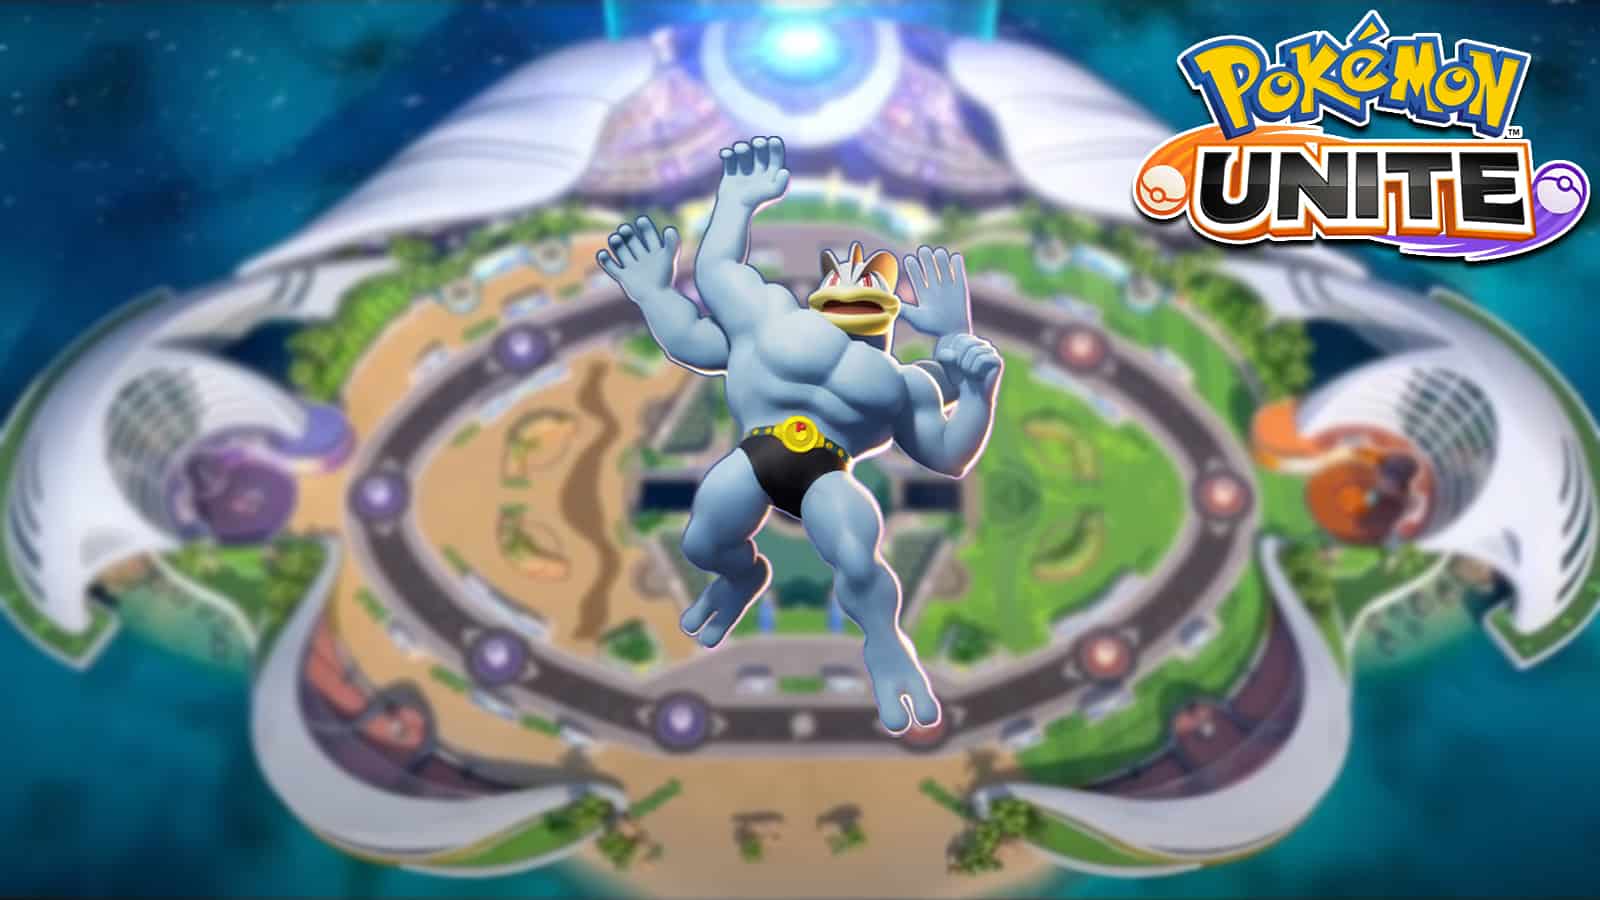 Cross Chop: Machamp Move Effect and Cooldown